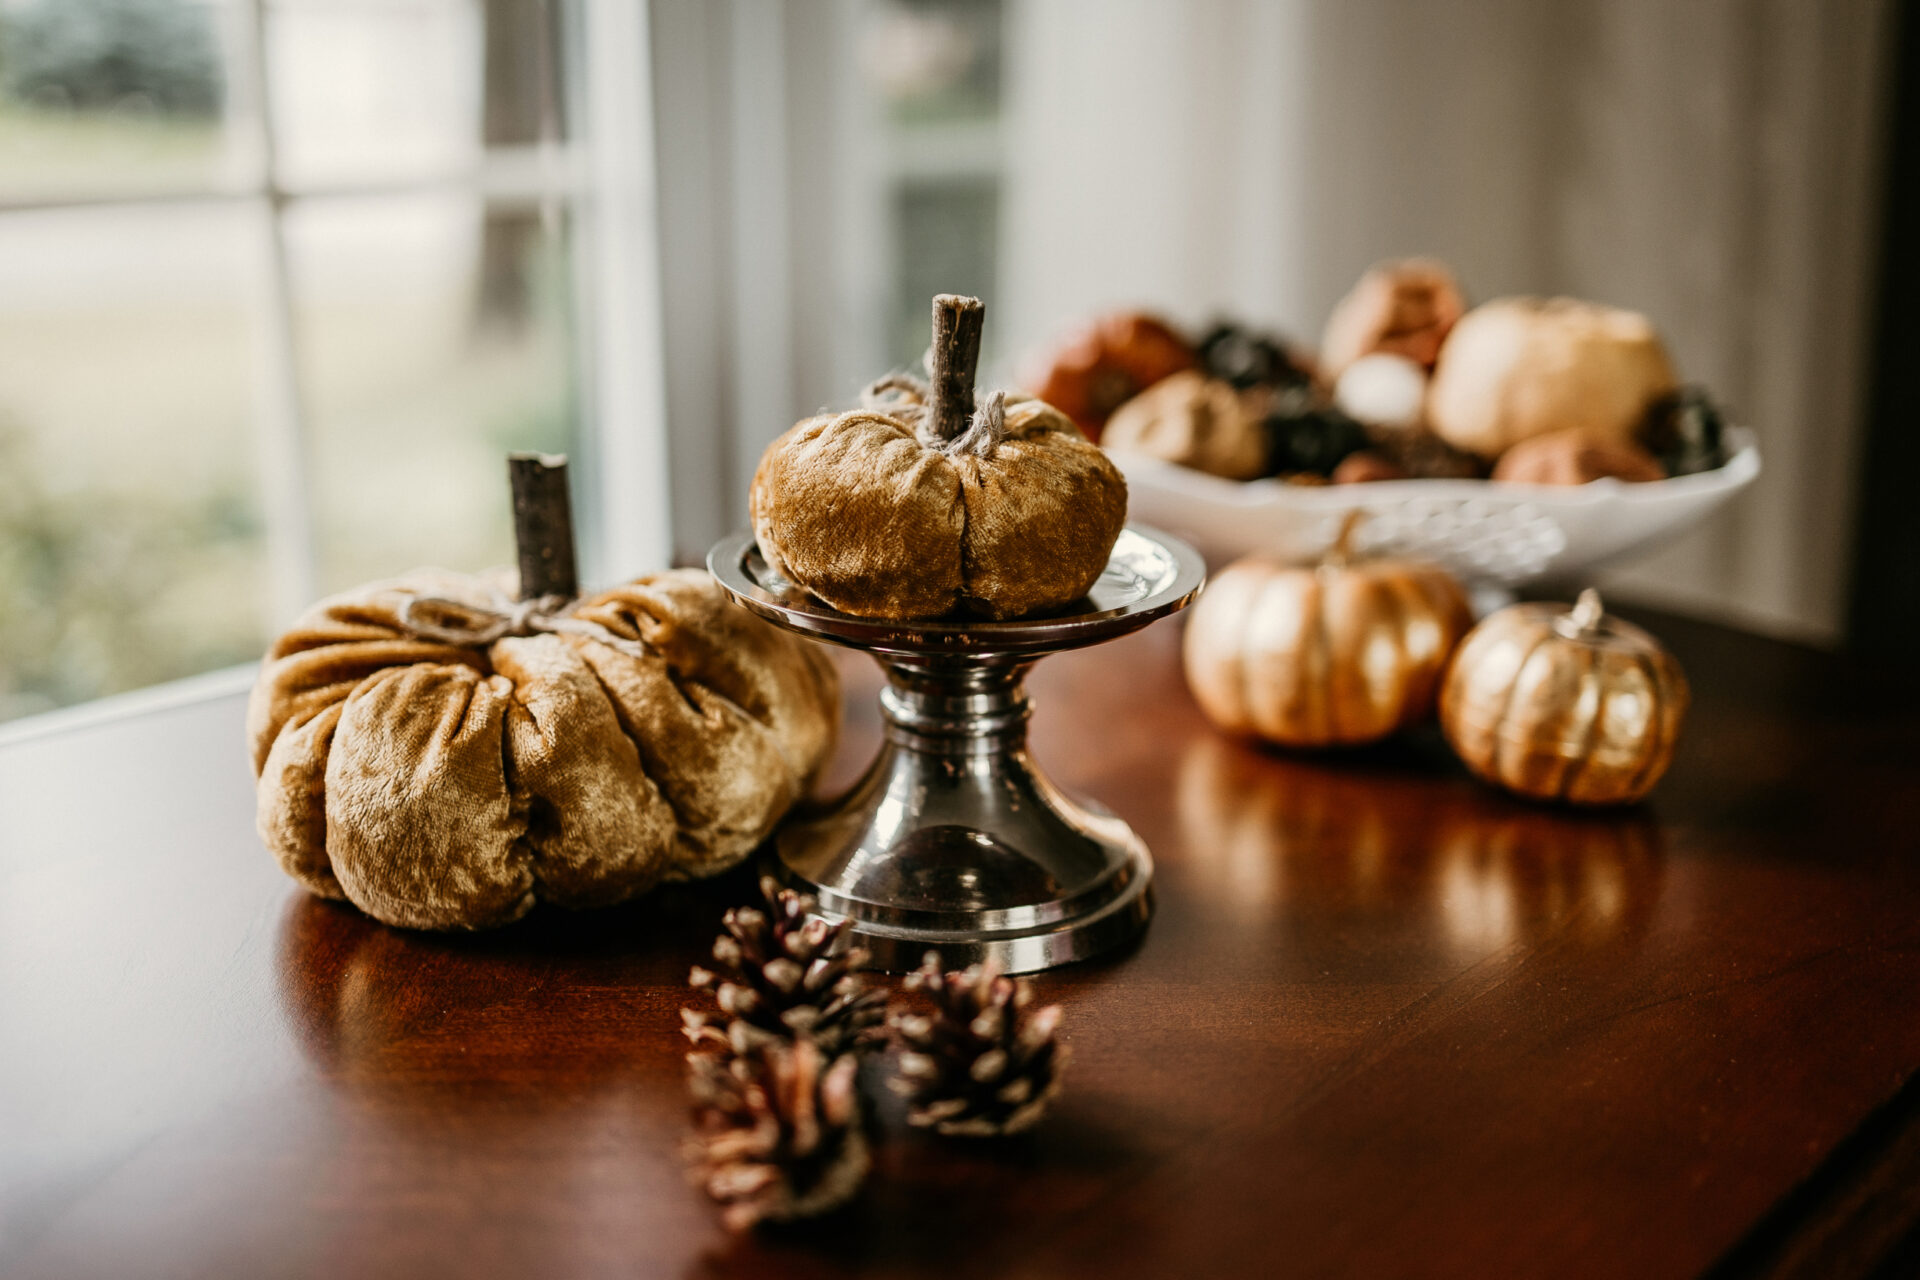 A set of 2 orange velvet pumpkins with wood sticks as their stems are photographed in front of a window. The larger pumpkin is to the left while the smaller pumpkin on the right is placed on a silver stand.